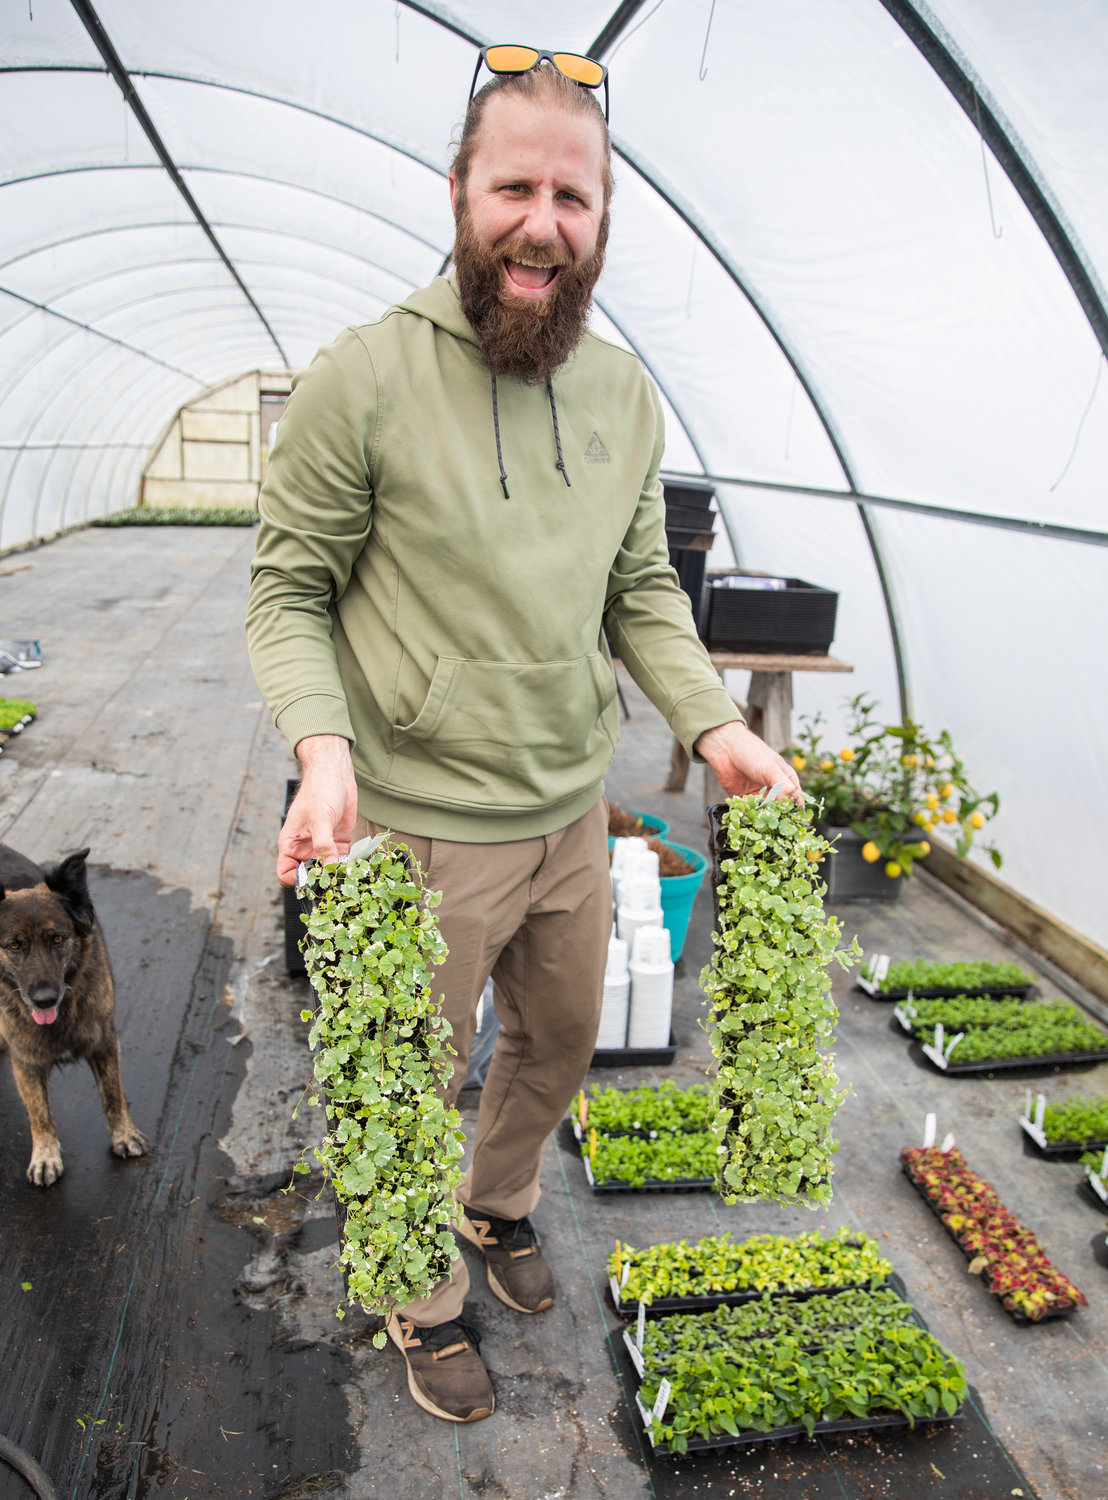 Kyle Aselton smiles while holding up plants alongside his dog Birdy Wednesday afternoon at the Dirty Thumb Nursery along state Route 6 near Adna.